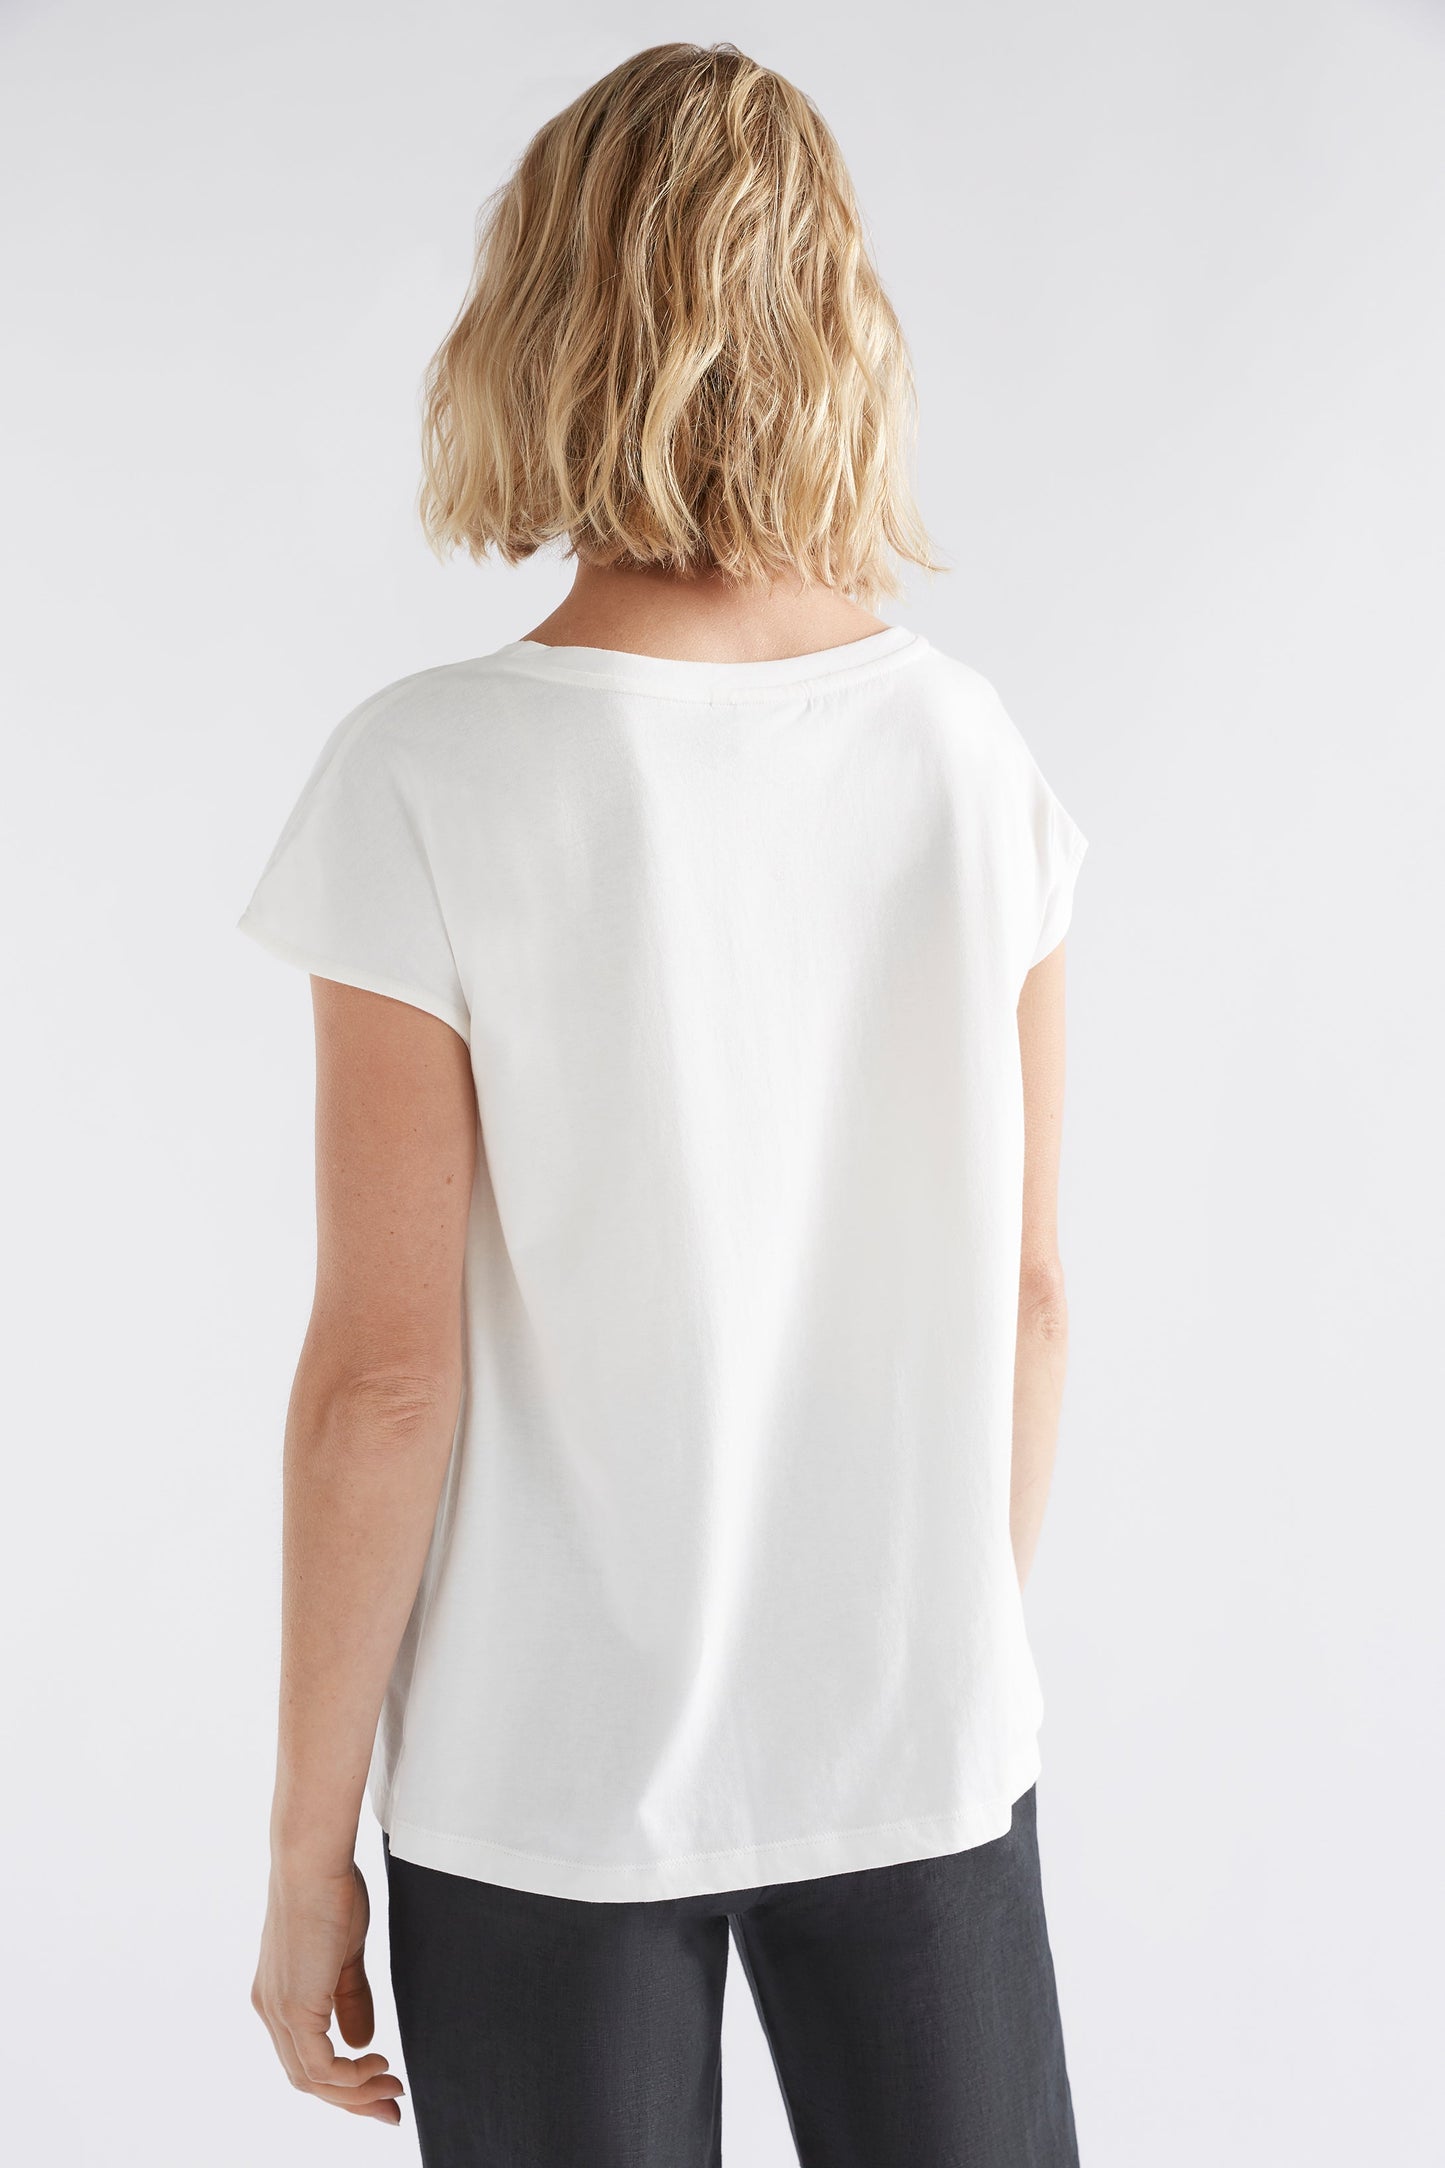 Anden Organic Cotton Placement Print Cap Sleeve Tee Model Back | MUSEUM PRINT